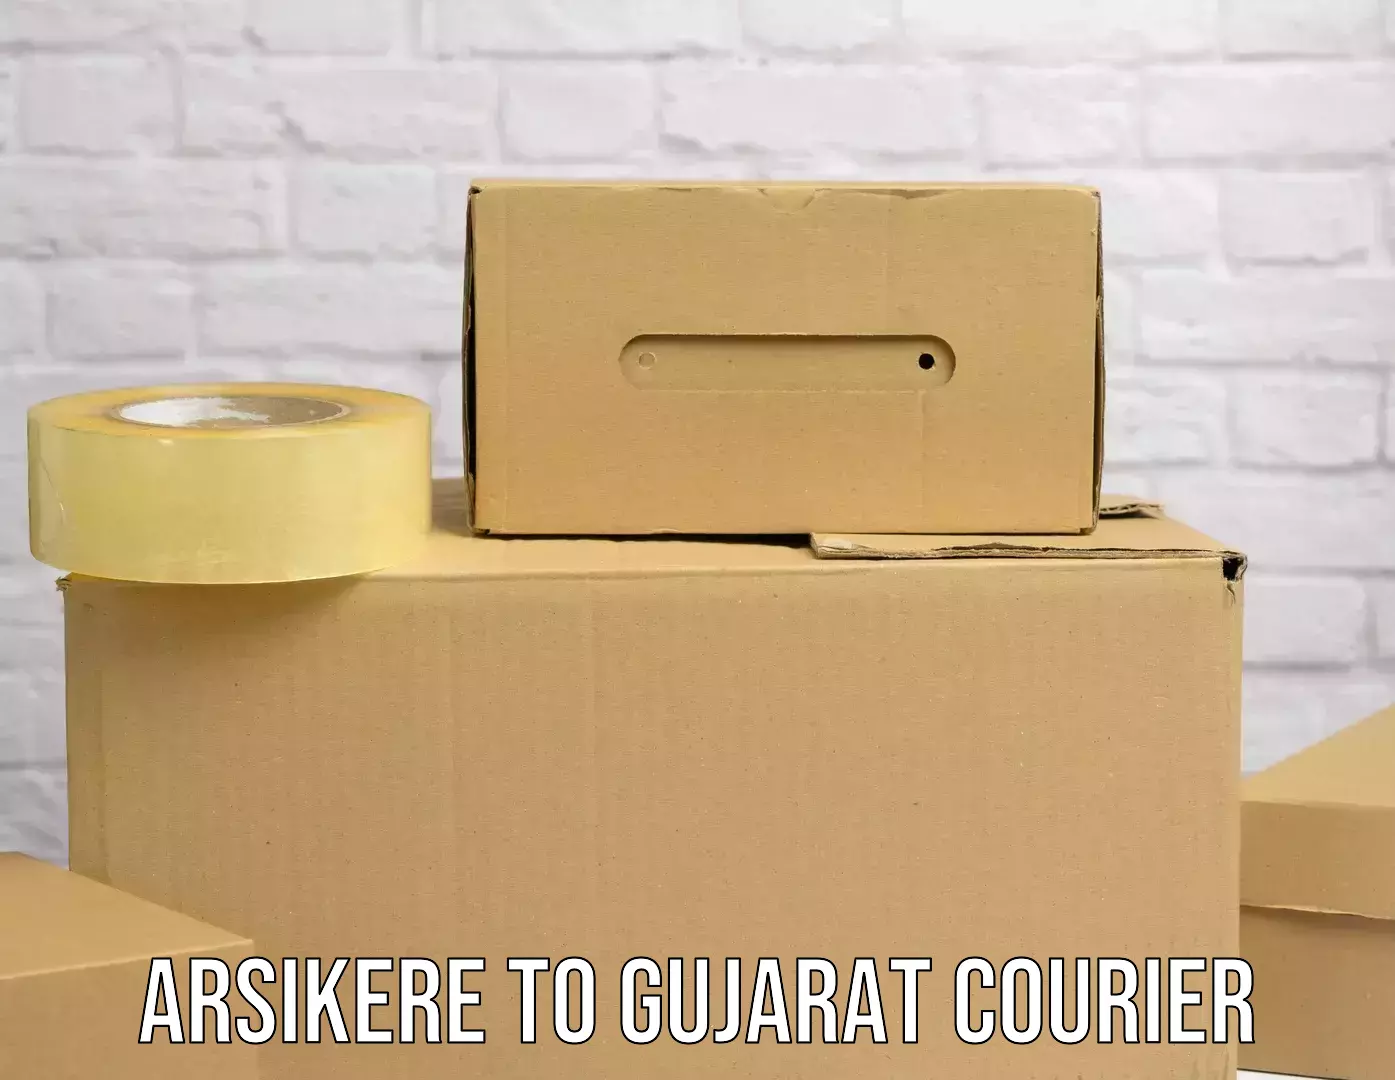 Postal and courier services Arsikere to Dharmaram